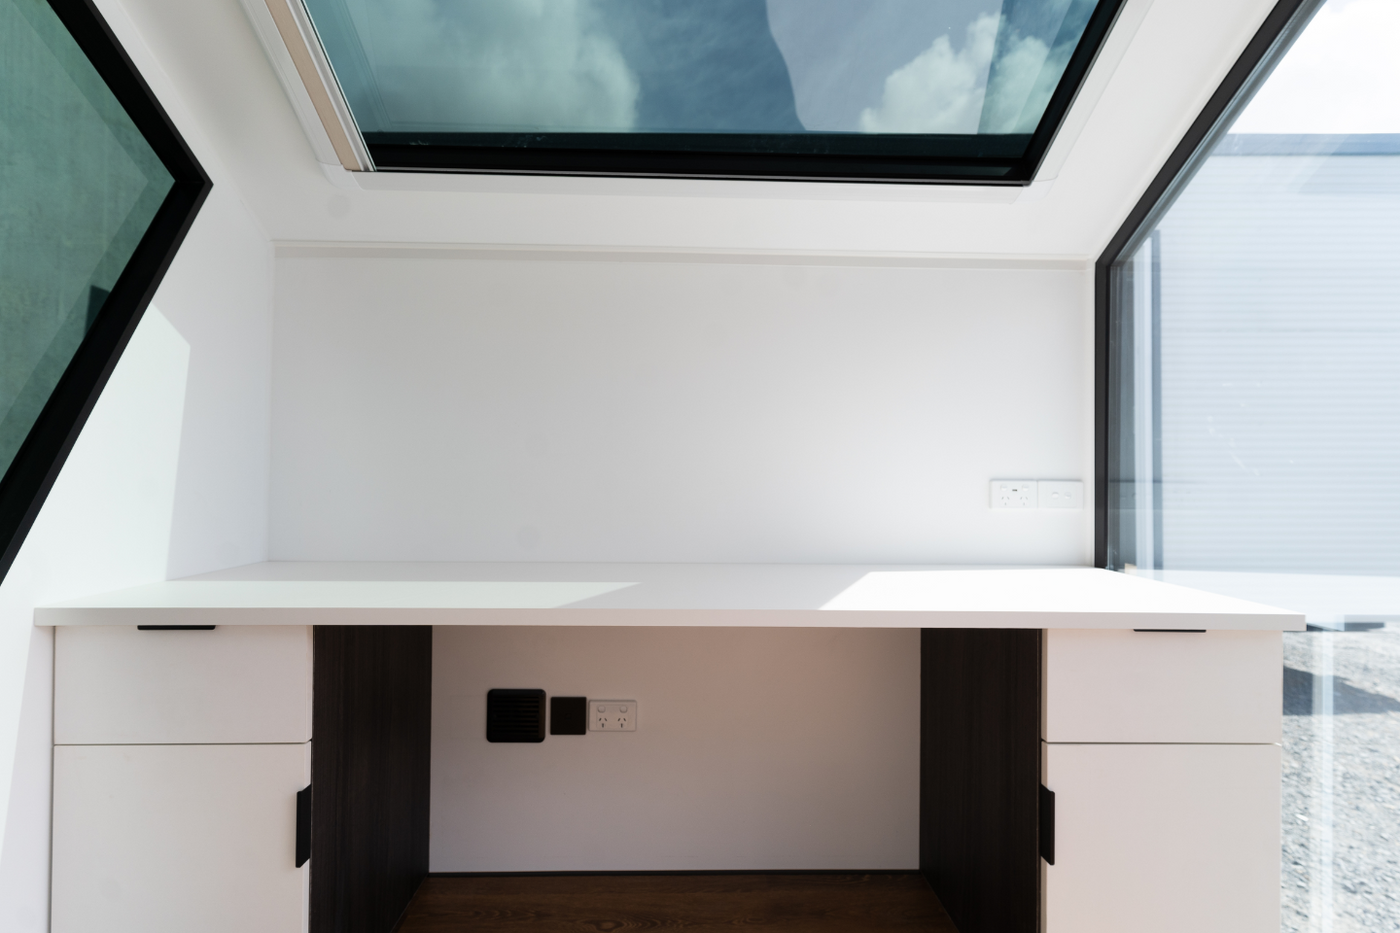 Desk space with sky light roof window.